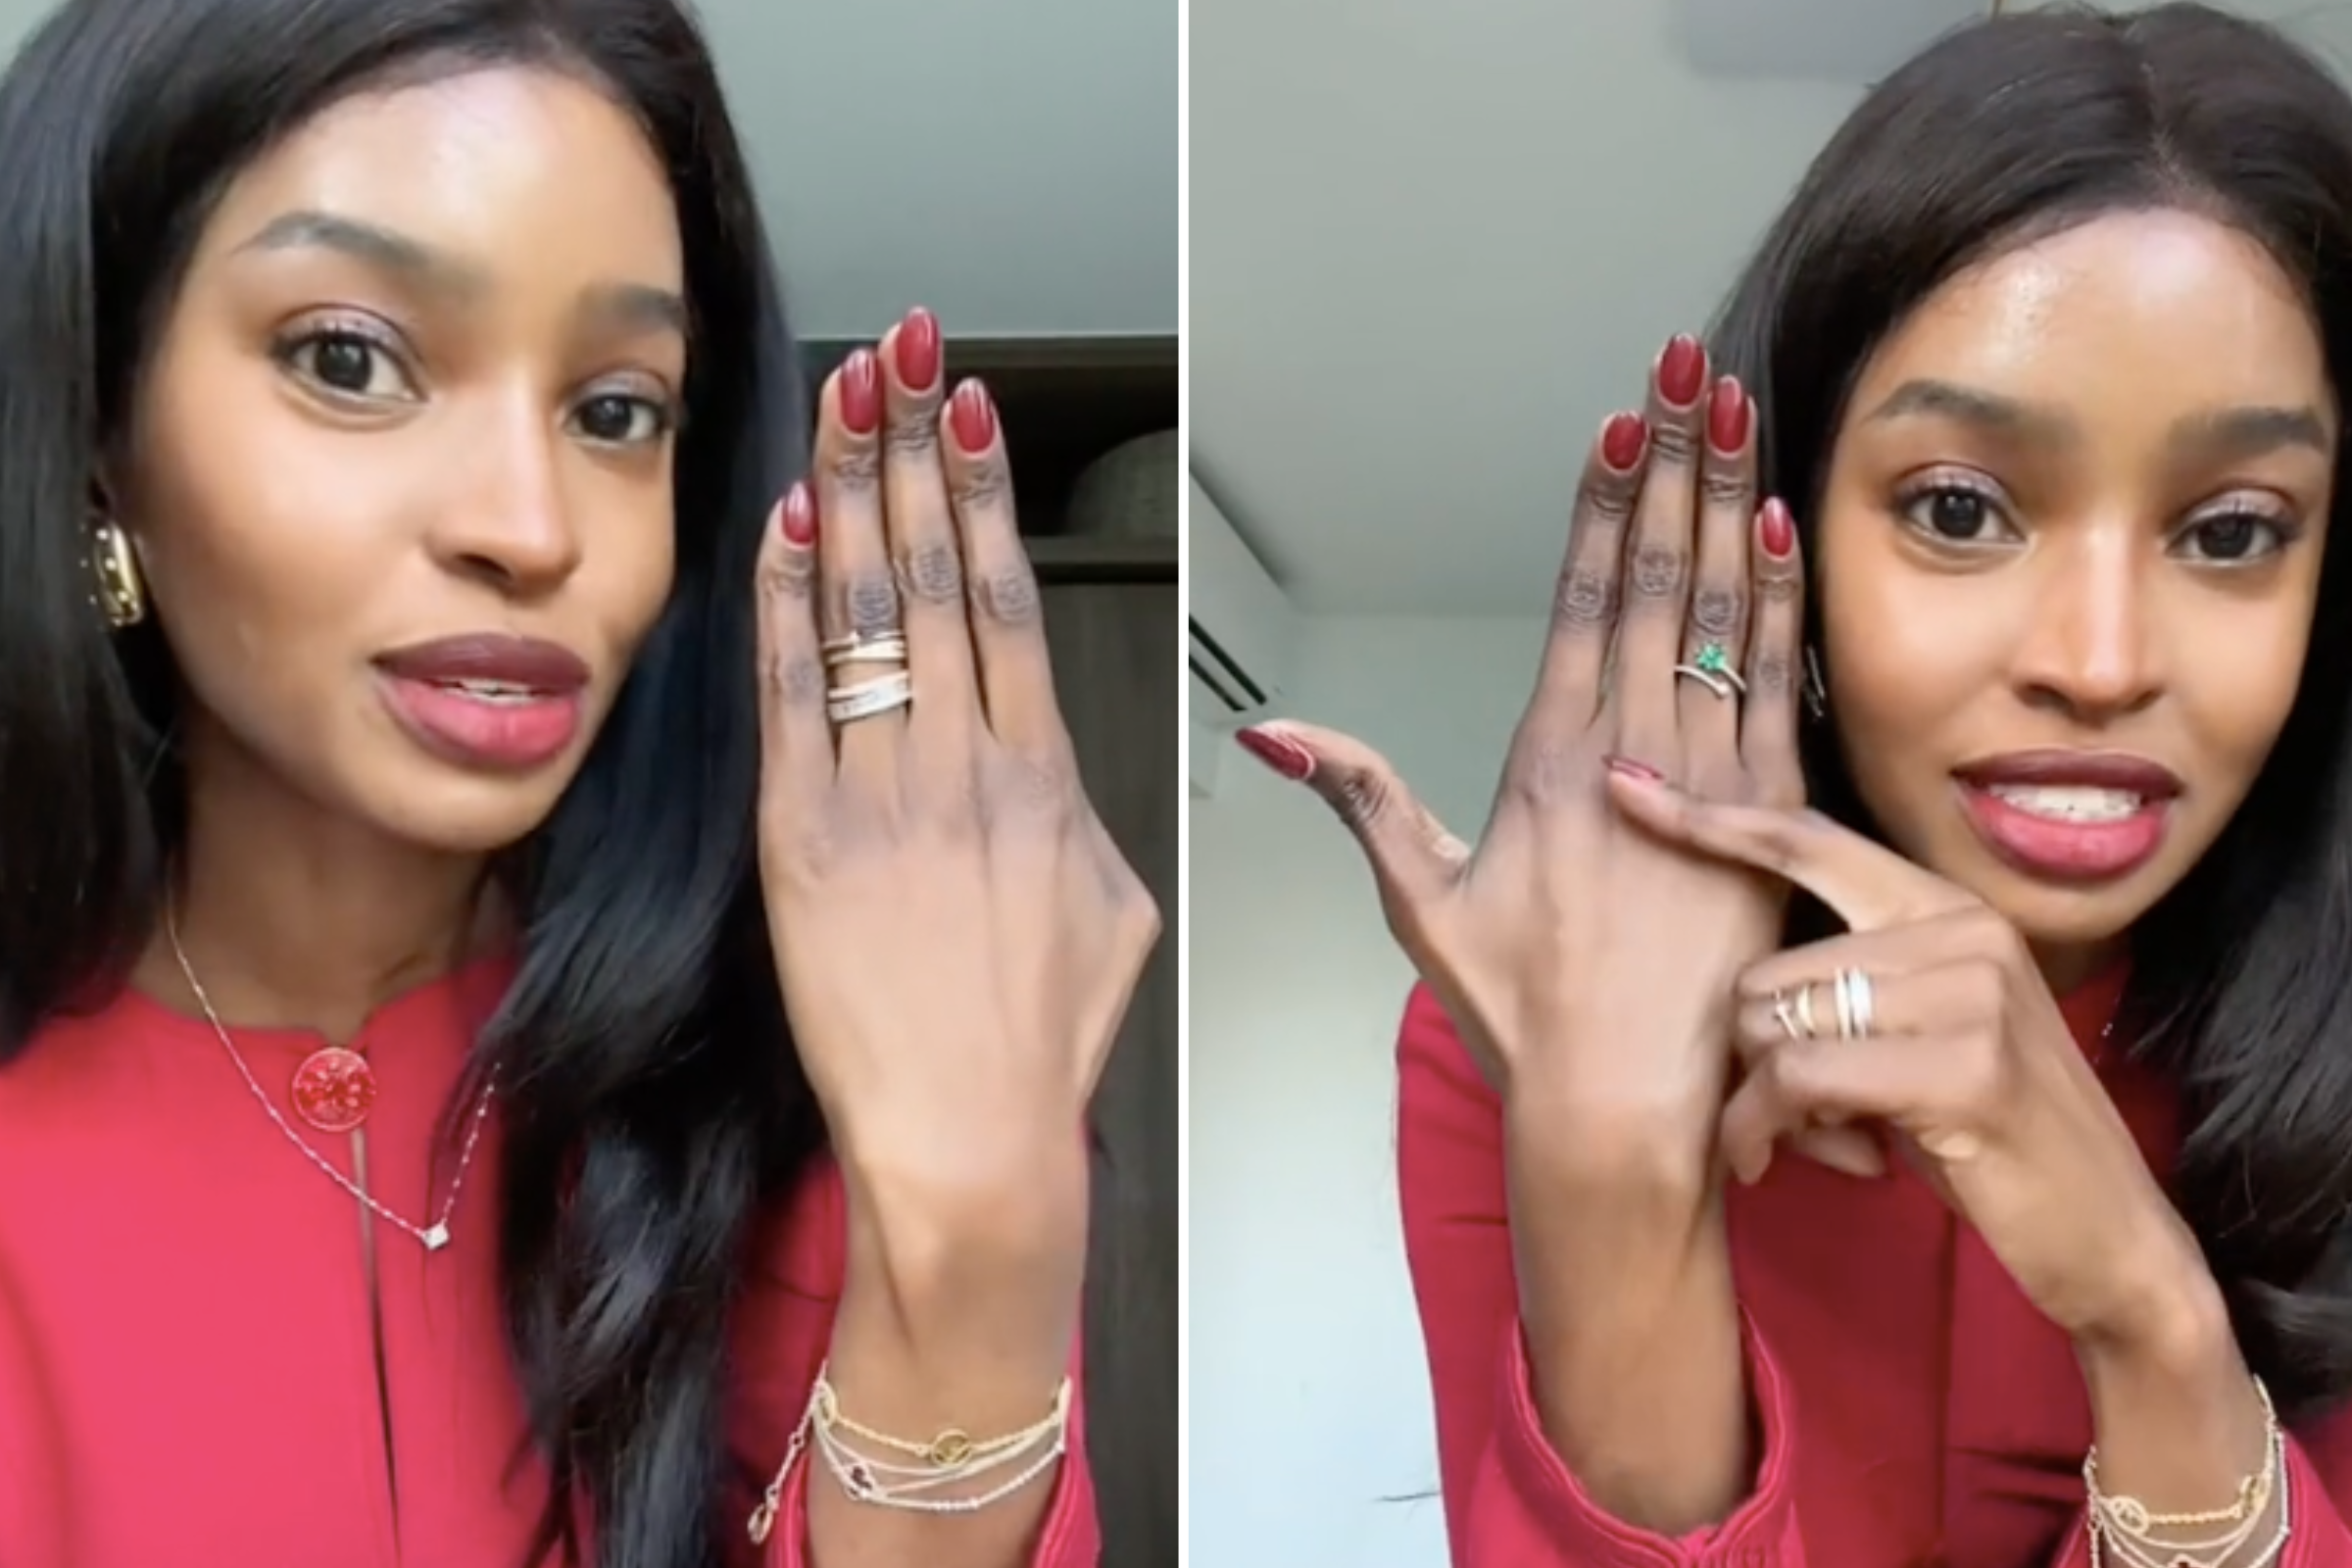 Woman Issues Warning As She Shares Shocking Result of Gel Manicure—'Damage